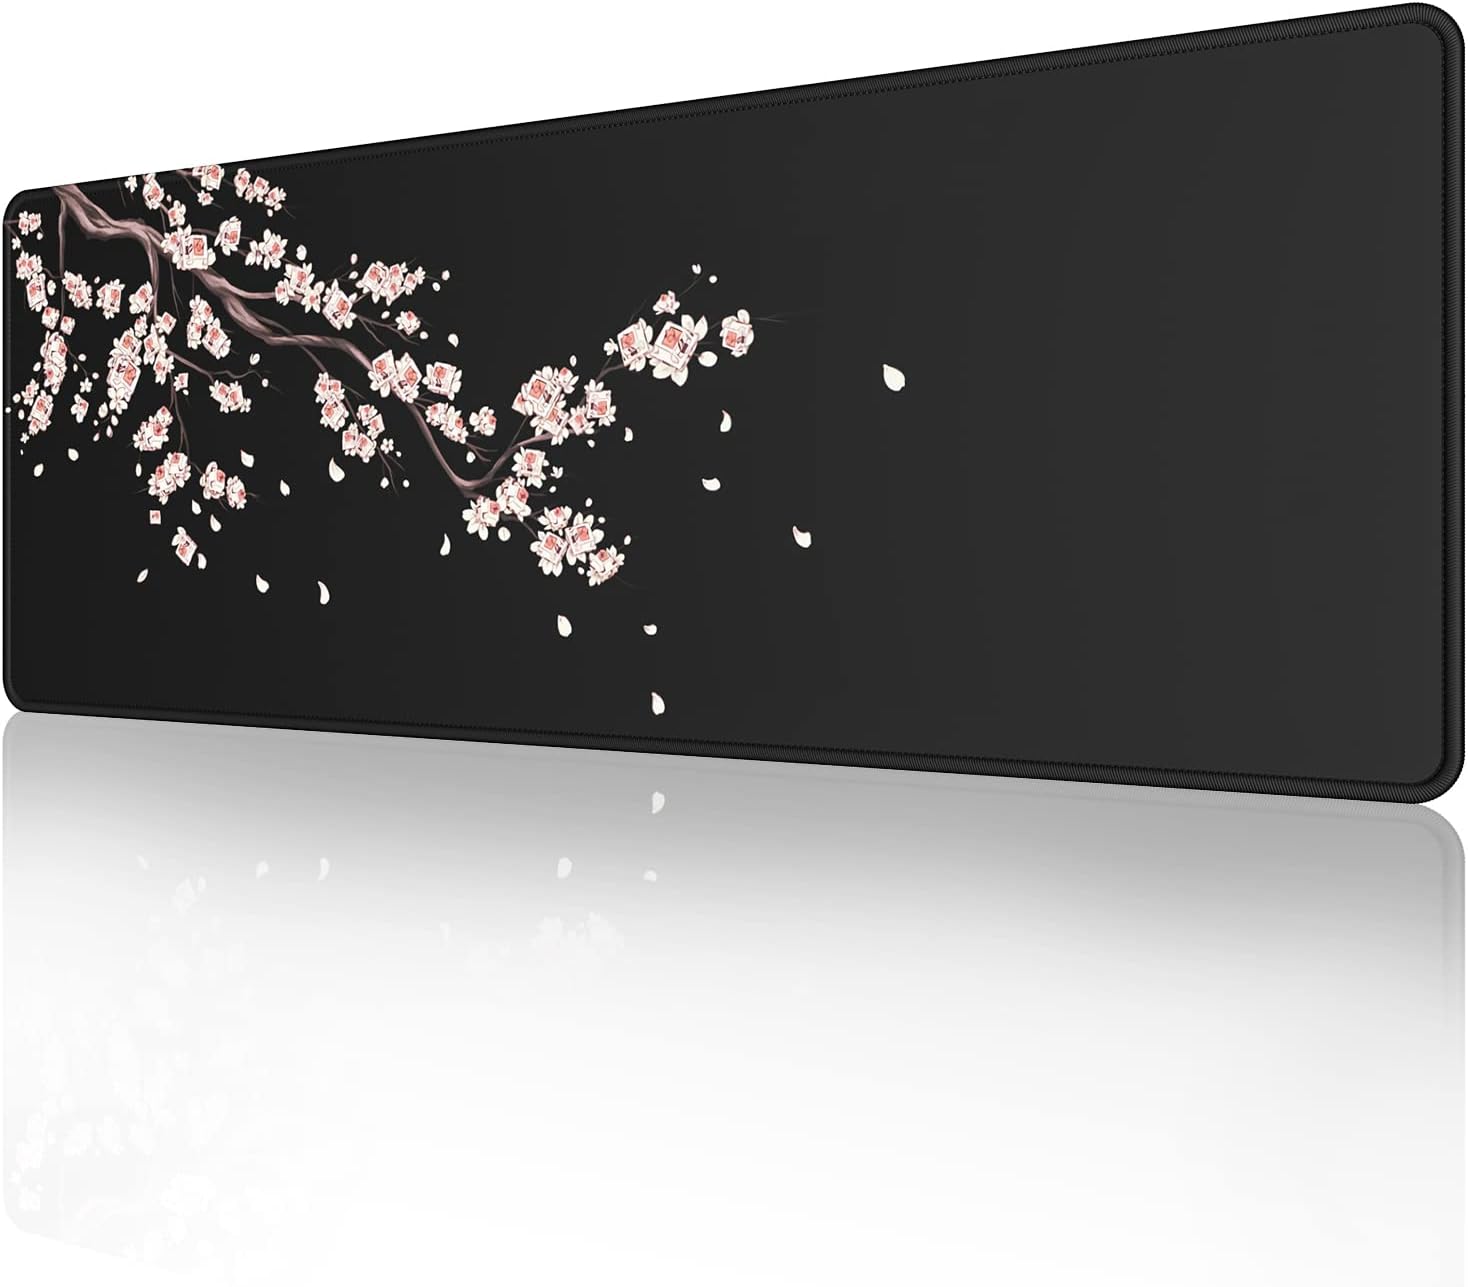 Japanese Plum Blossoms Black Mouse Pad (31.5  11.8  0.12 inch) Extended Large Mouse Mat Desk Pad, Stitched Edges Mousepad,Non-Slip Rubber Base,Gaming Mouse Pad XL.